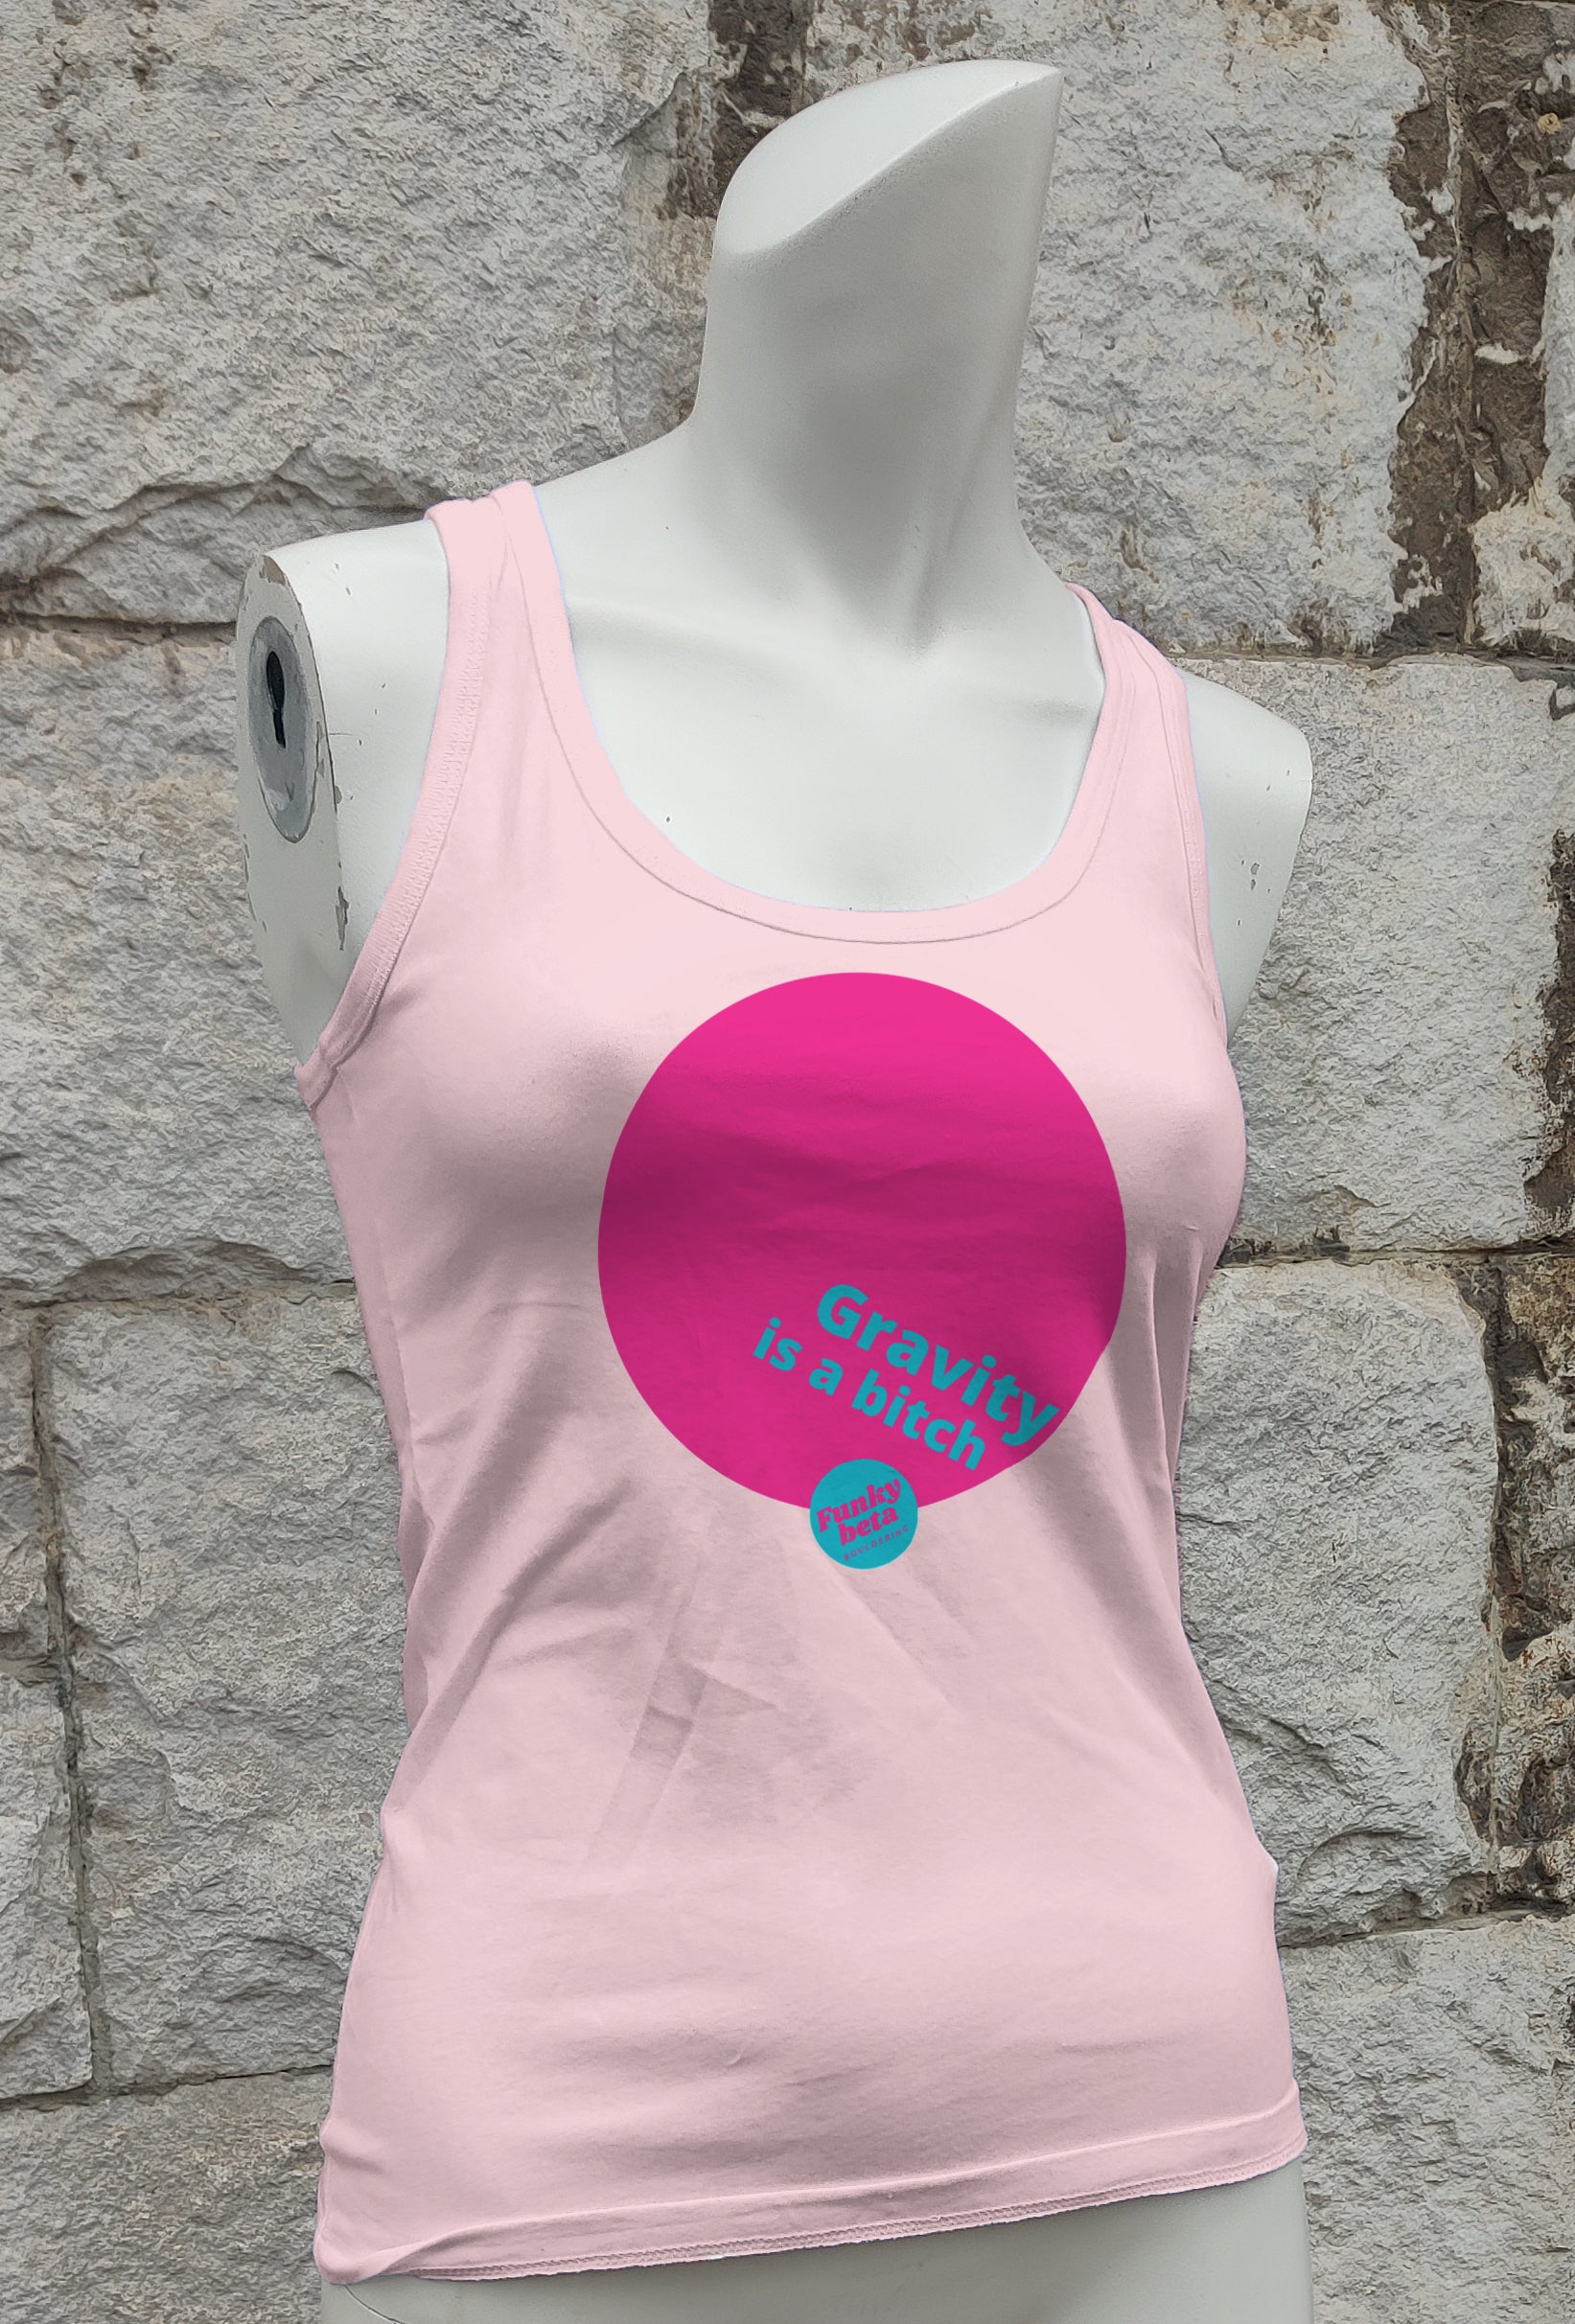 Gravity Is a B**** - Climbing T-Shirt for Ladies